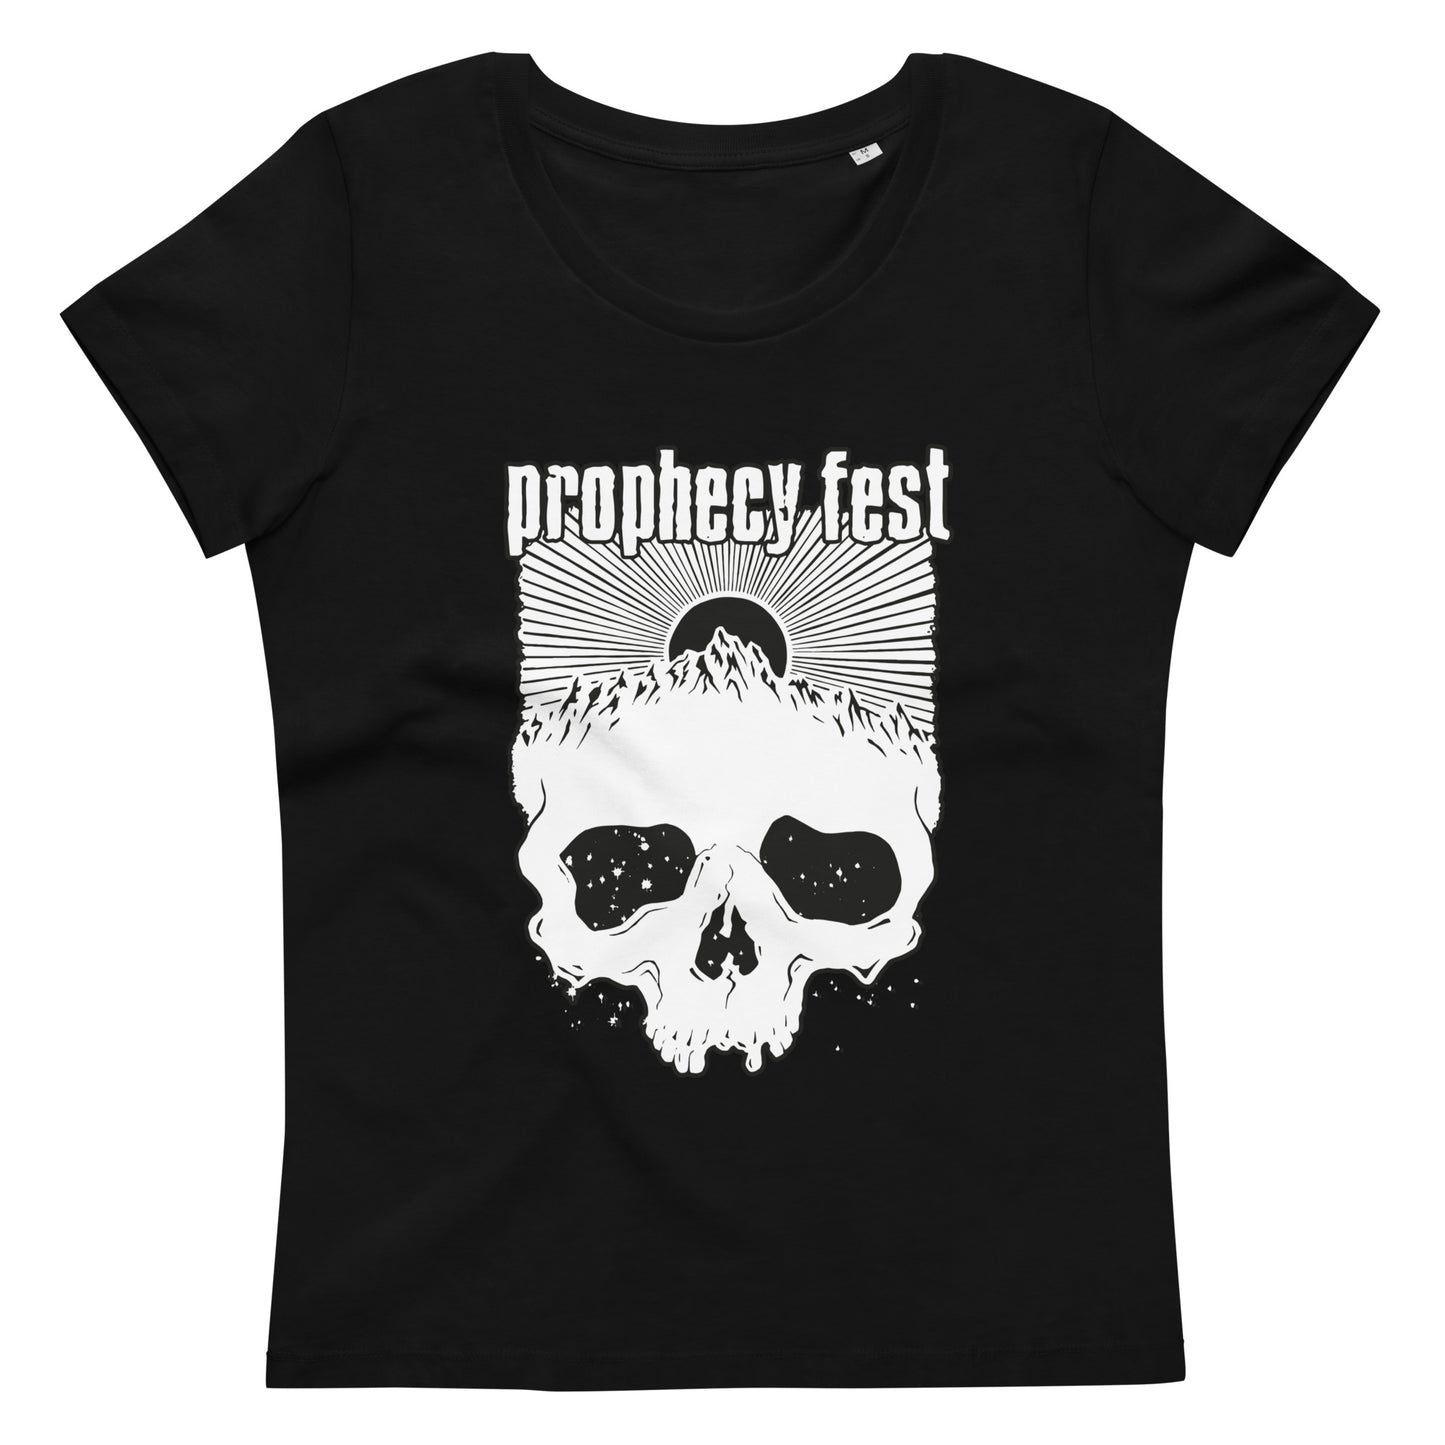 PROPHECY FEST - Women's Fitted Organic T-Shirt